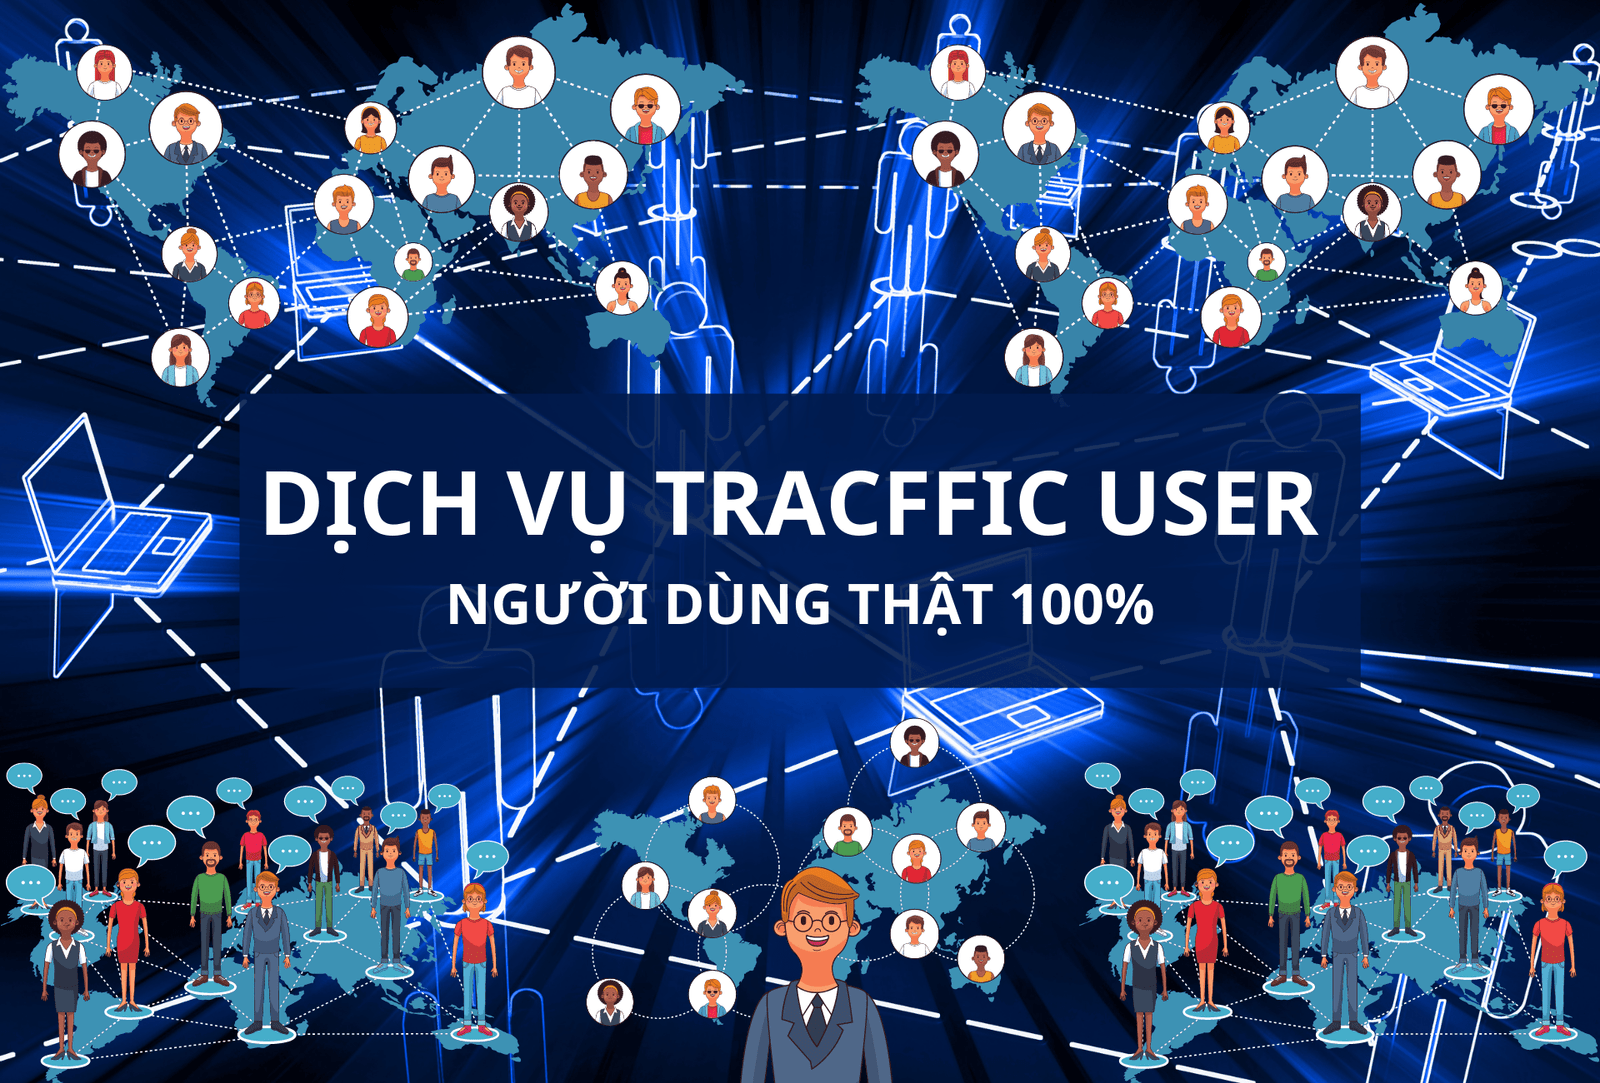 dịch vụ traffic user download dichvuseotop.com.vn